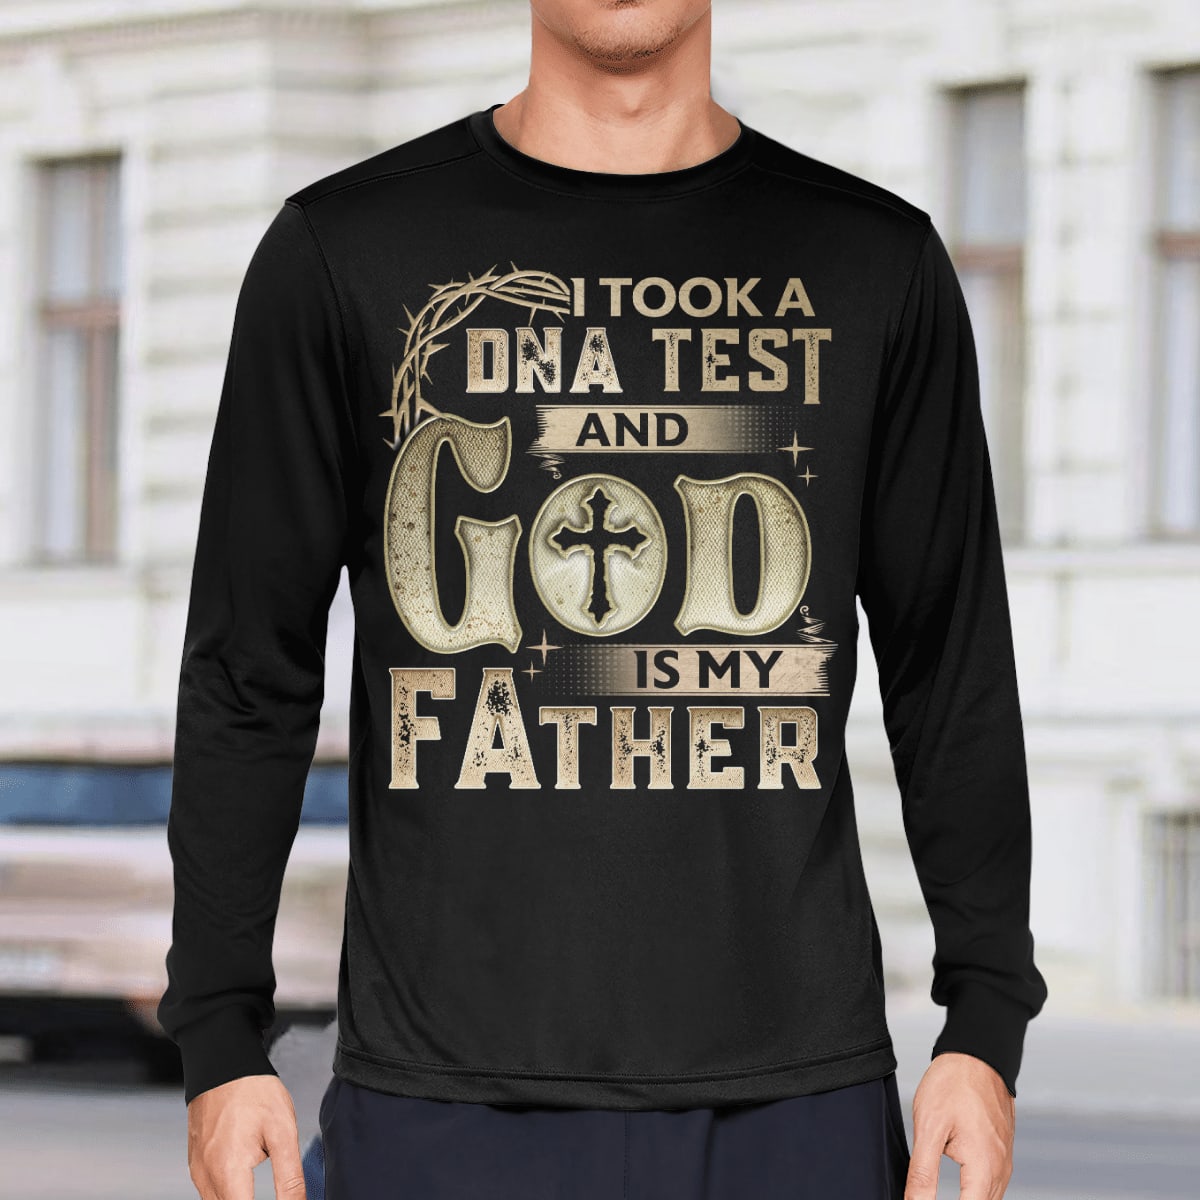 I Took A Dna Test And God Is My Father, Christian T-Shirt, Religious T-Shirt, Jesus Sweatshirt Hoodie, Faith T-Shirt